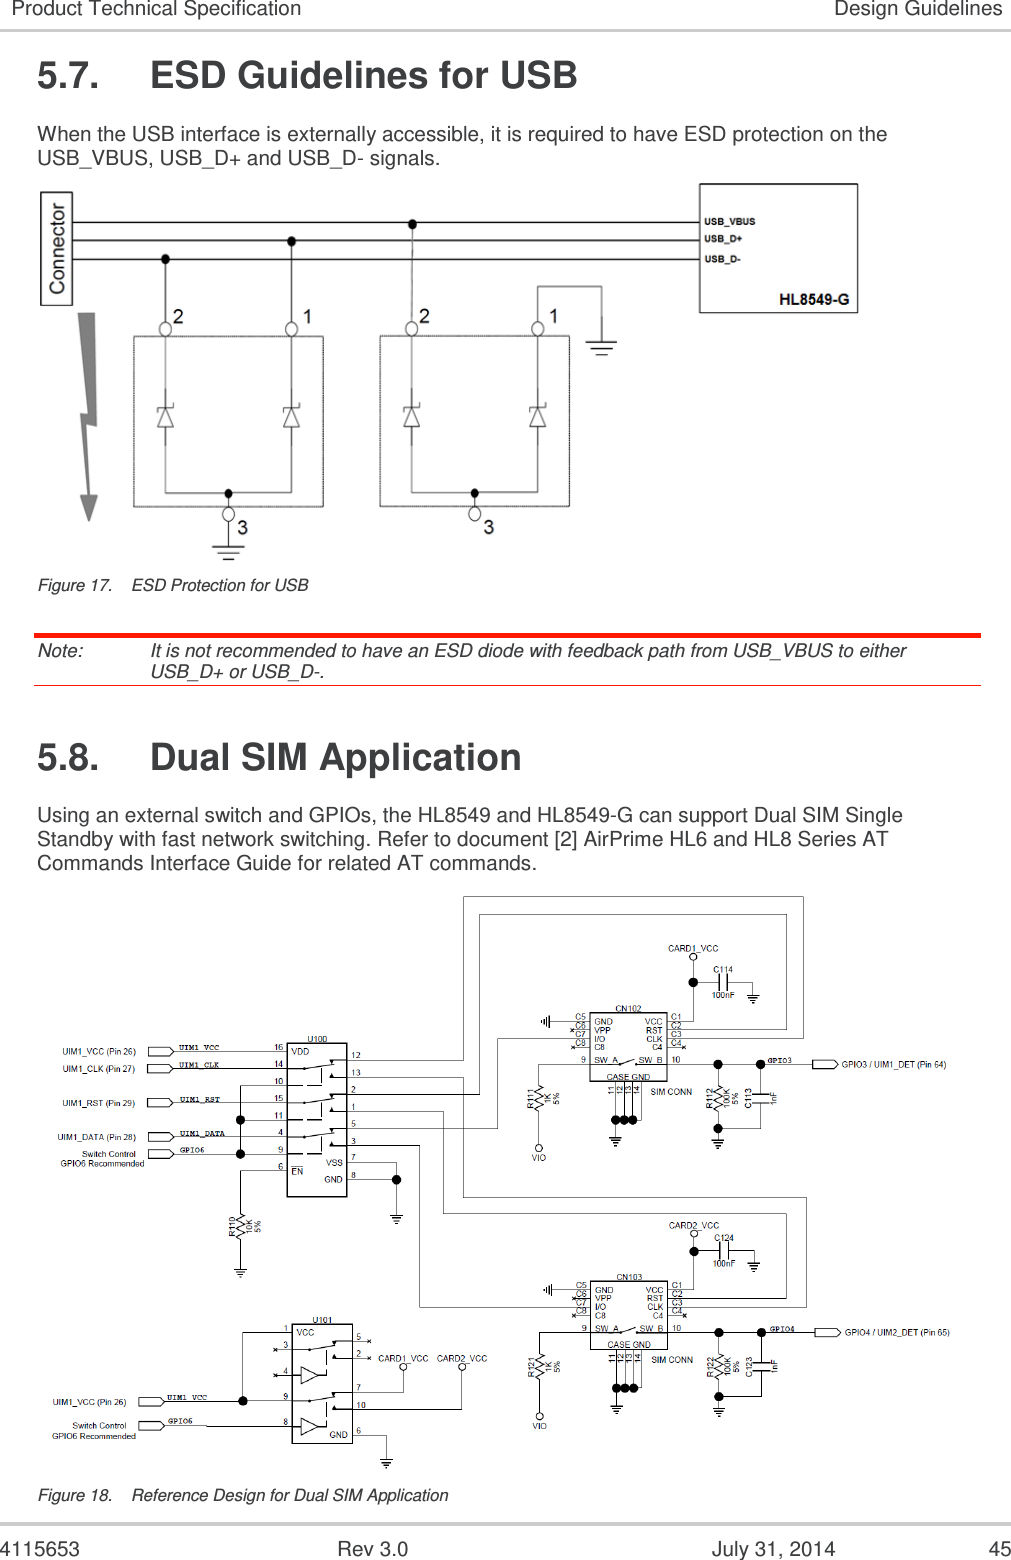  4115653  Rev 3.0  July 31, 2014  45 Product Technical Specification Design Guidelines 5.7.  ESD Guidelines for USB When the USB interface is externally accessible, it is required to have ESD protection on the USB_VBUS, USB_D+ and USB_D- signals.  Figure 17.  ESD Protection for USB Note:   It is not recommended to have an ESD diode with feedback path from USB_VBUS to either USB_D+ or USB_D-. 5.8.  Dual SIM Application Using an external switch and GPIOs, the HL8549 and HL8549-G can support Dual SIM Single Standby with fast network switching. Refer to document [2] AirPrime HL6 and HL8 Series AT Commands Interface Guide for related AT commands.  Figure 18.  Reference Design for Dual SIM Application 